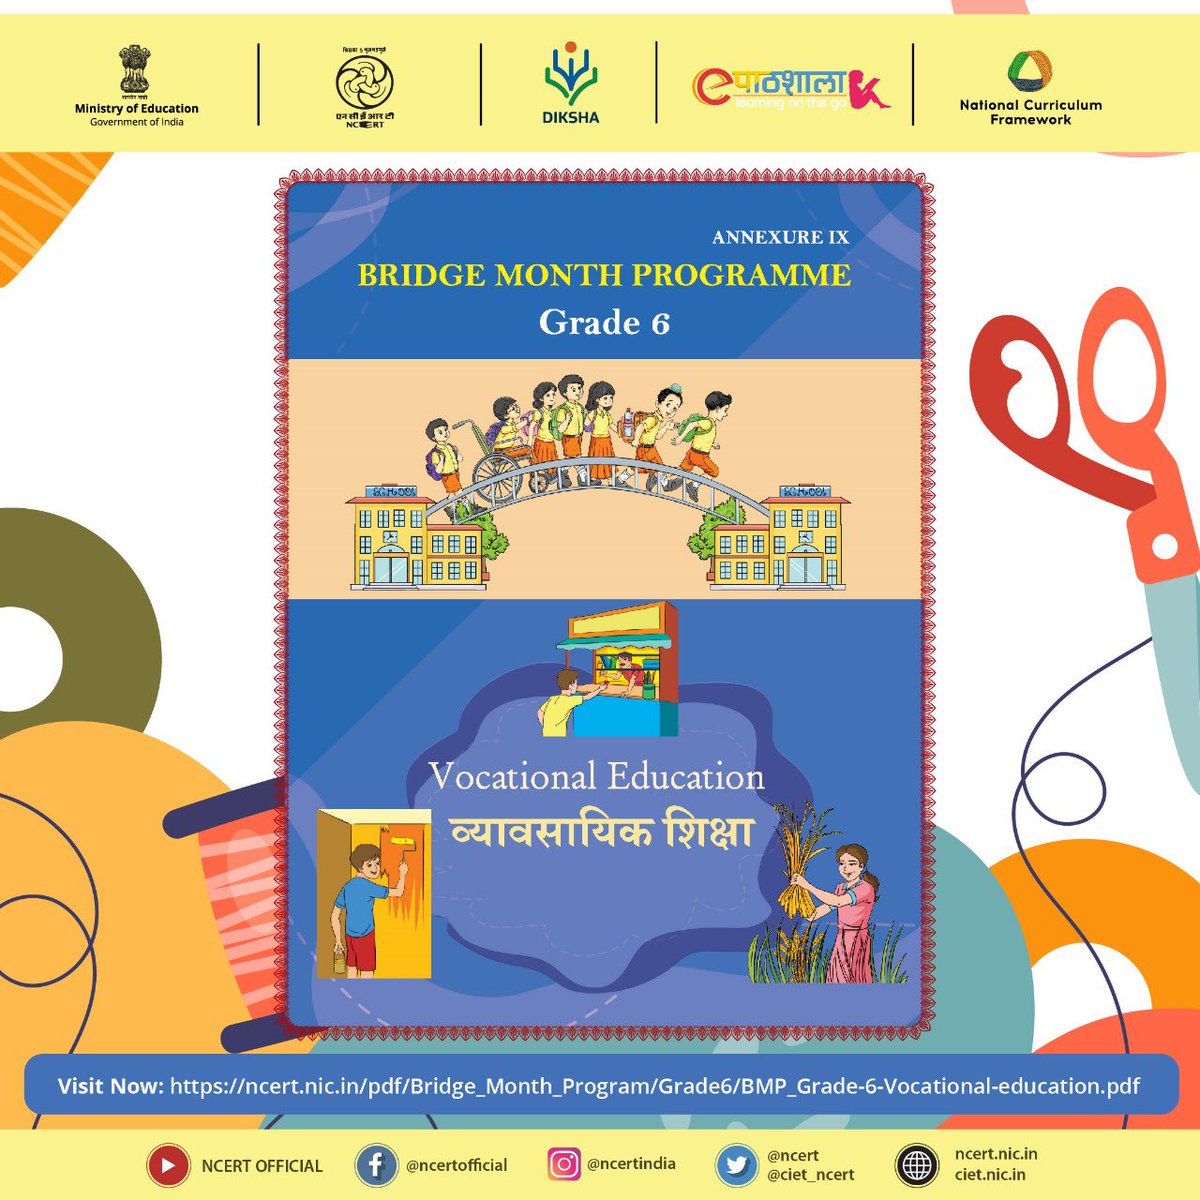 Discover vocational education opportunities with NCERT's Bridge Month Course for Grade 6 curriculum. Equip yourself with practical skills for real-world success. Download now: ncert.nic.in/pdf/Bridge_Mon… 

#VocationalEducation #Grade6 #NCERT #EducationForAll #TeachersEmpowerment…